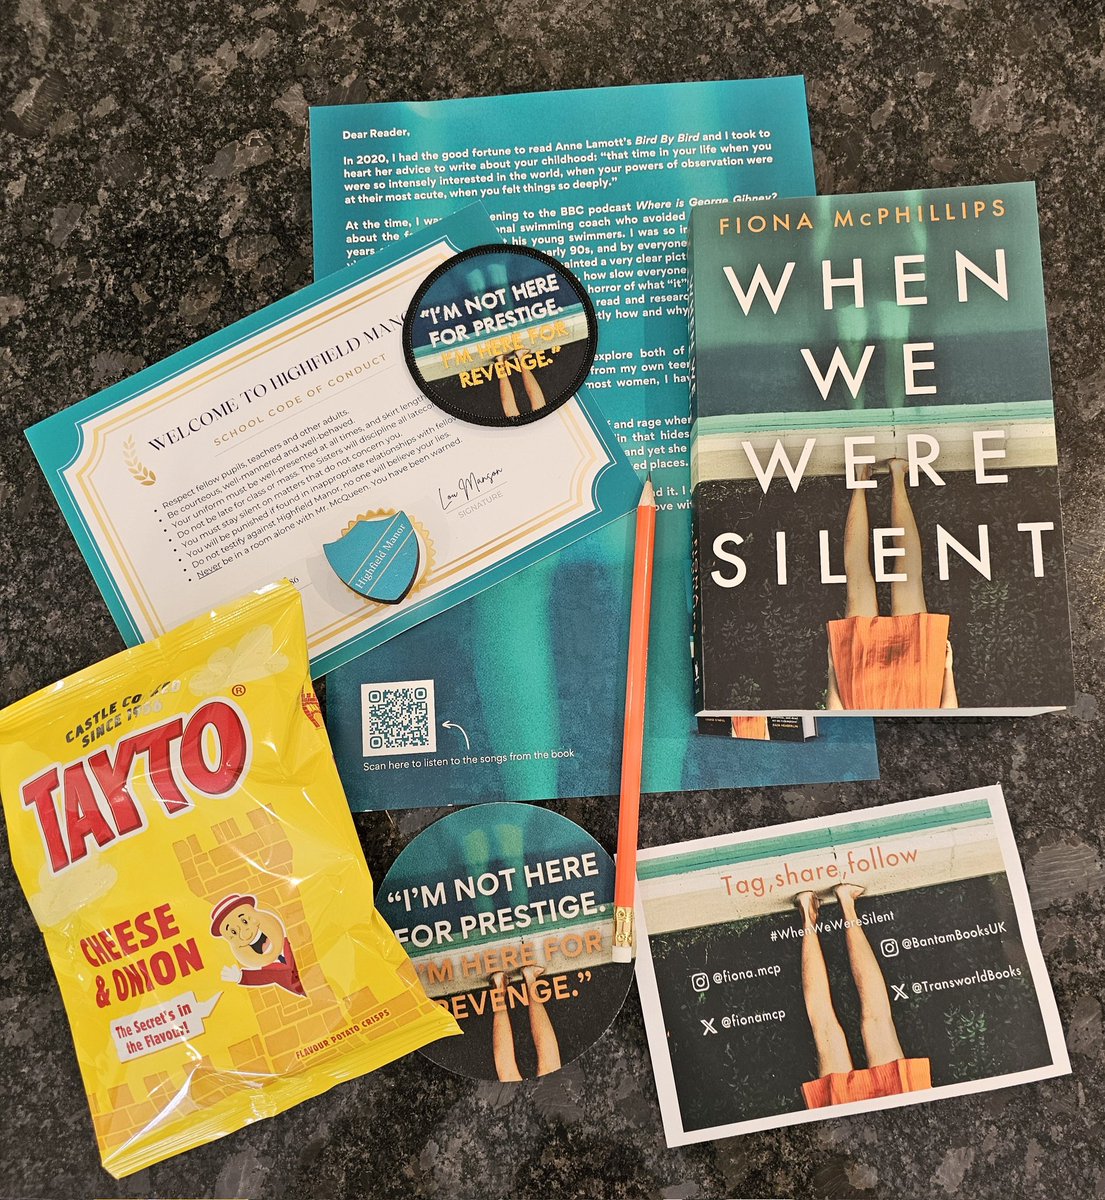 Thank you so much @TransworldBooks for this stunning package
#WhenWeWereSilent @fionamcp is published on 2nd May
#bookbloggers #bookX